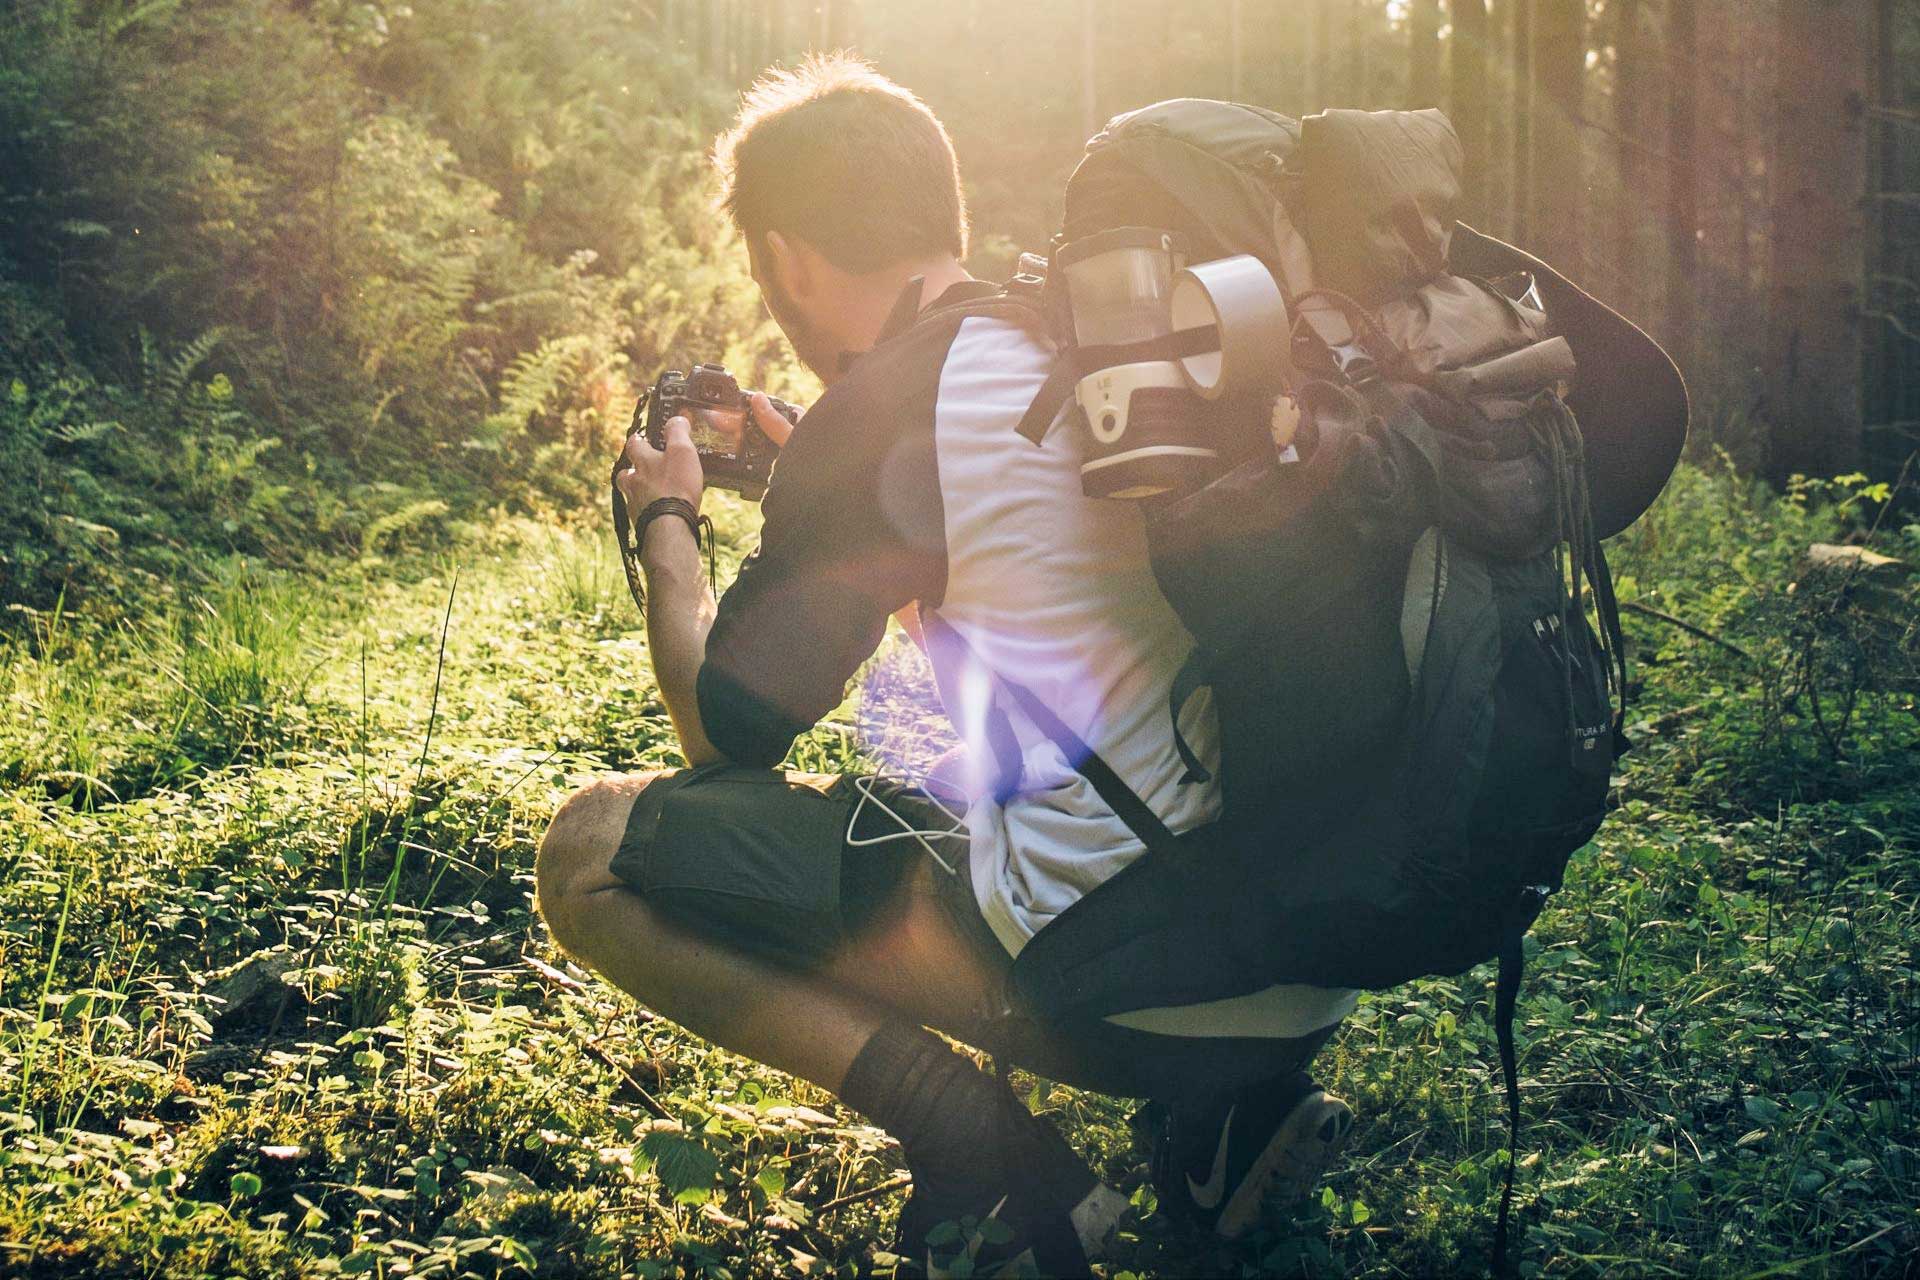 A man carrying a backpack bends down in a forest to take pictures of the surrounding nature.